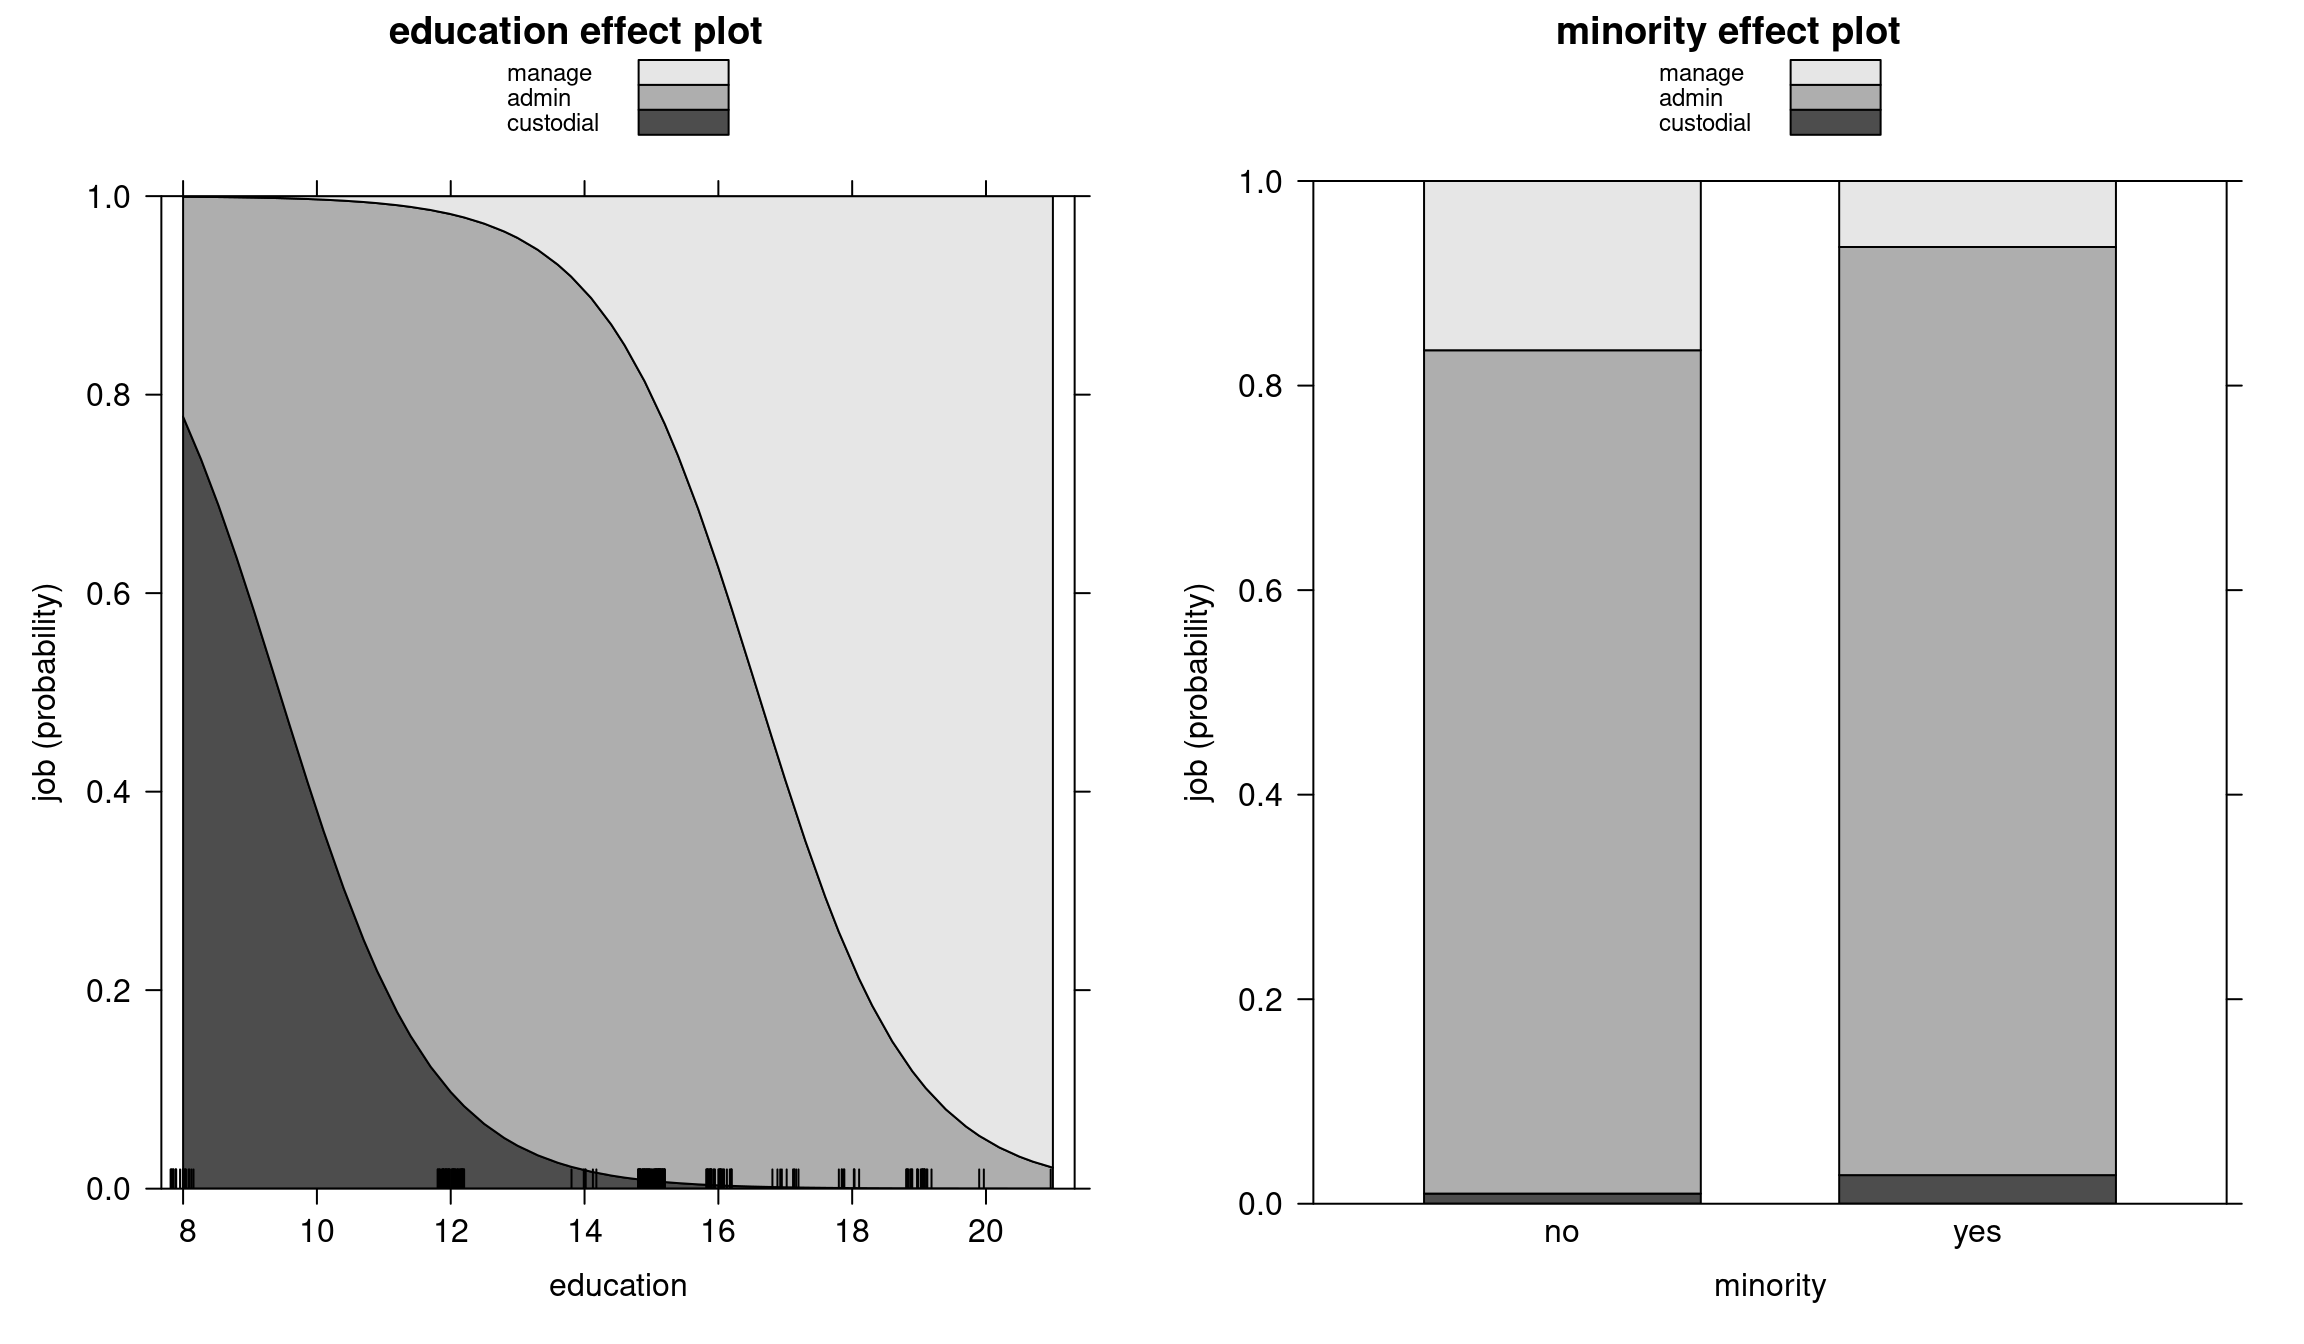 Education and minority stacked effect plots - Ordered model